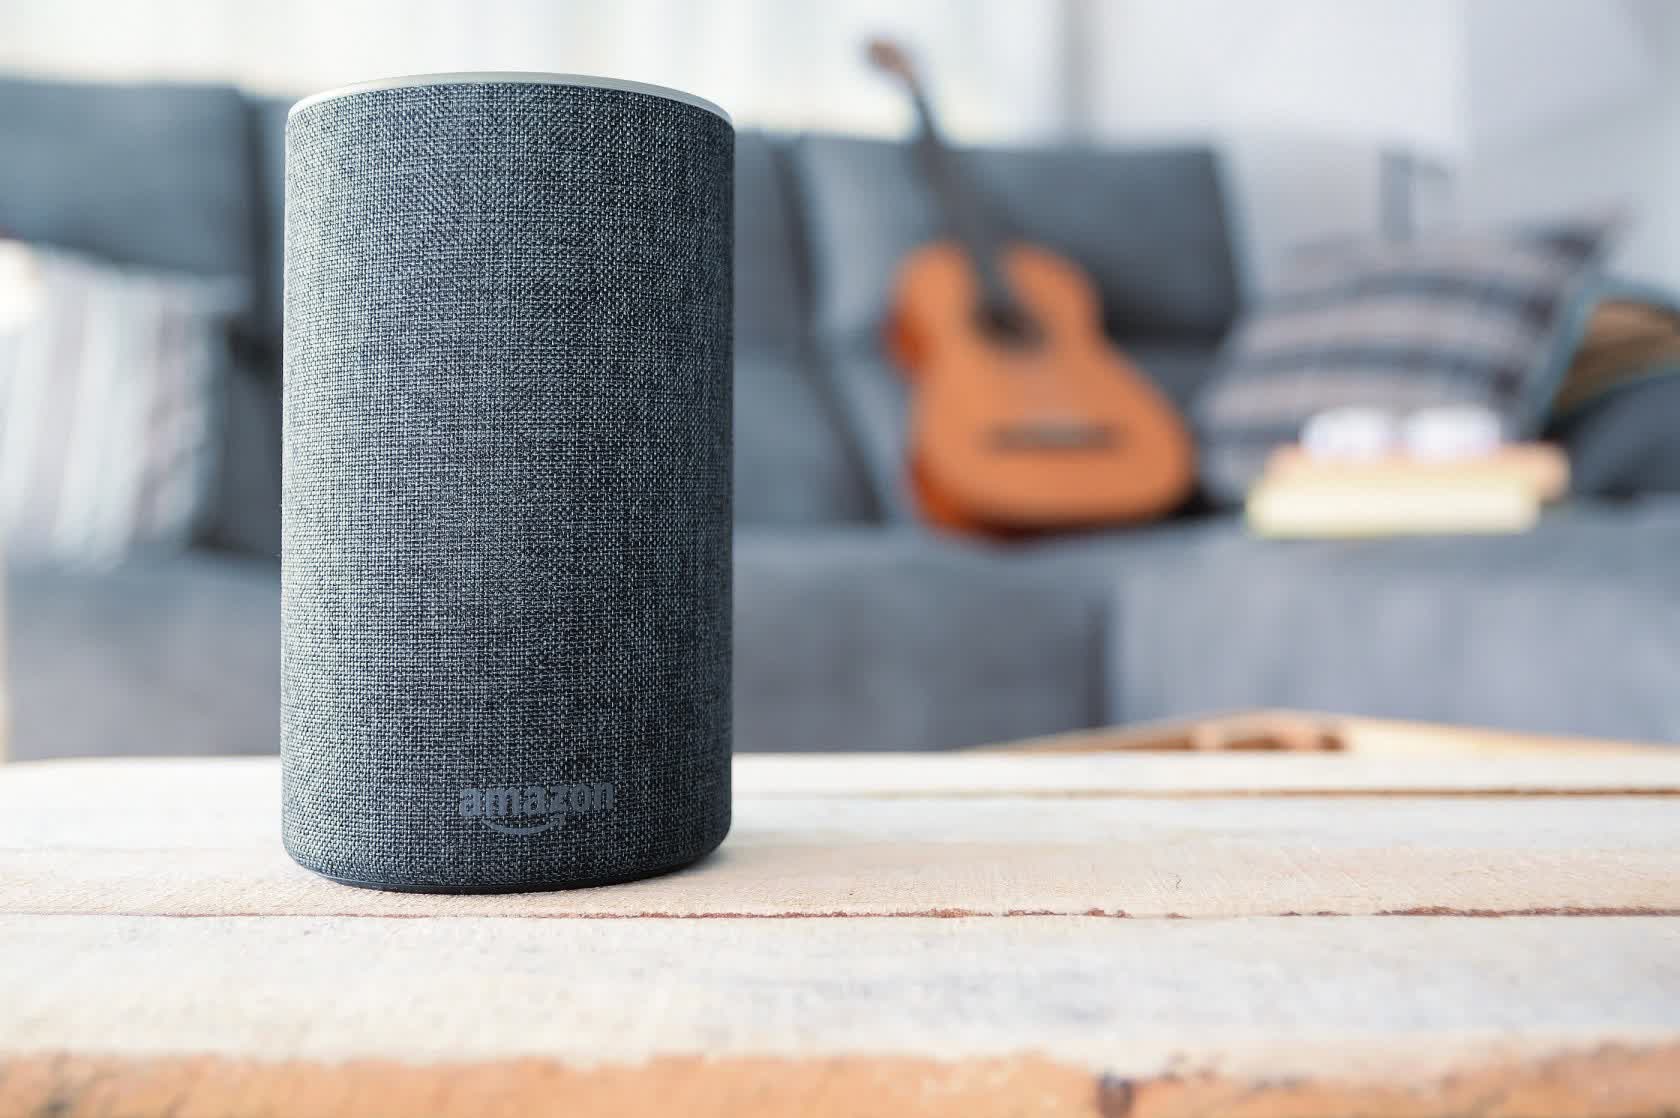 Your Echo smart speakers may help Amazon build its Bluetooth-based 'Sidewalk' network